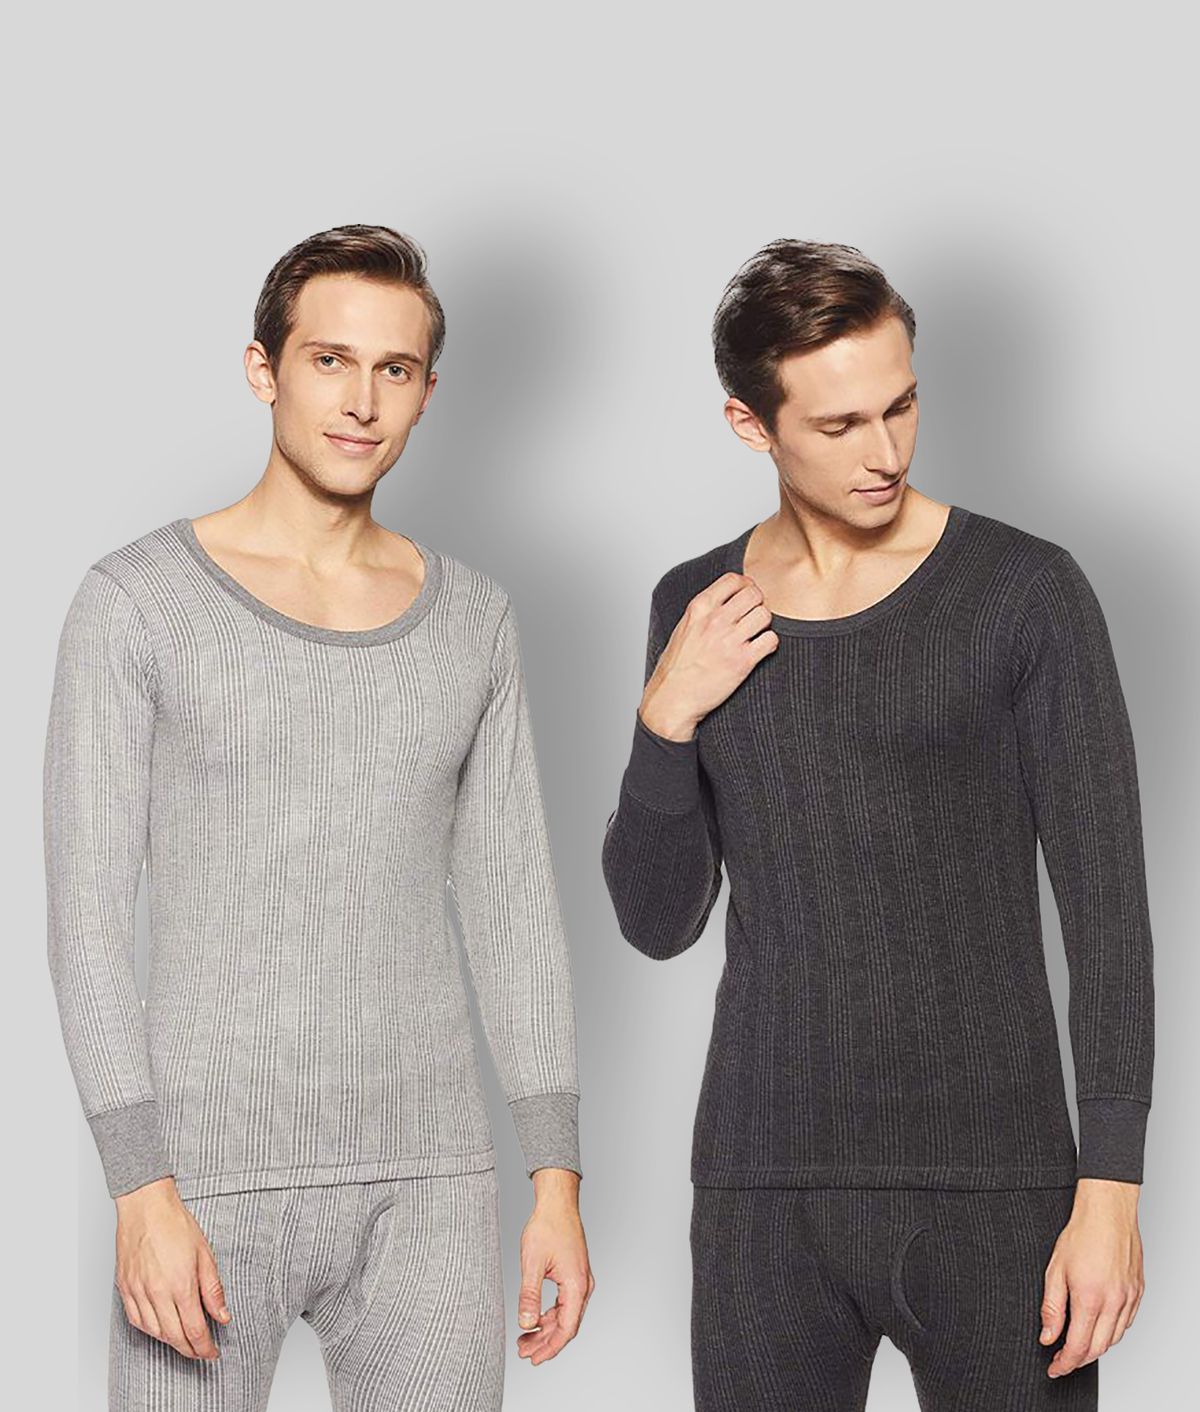     			Dixcy Scott - Multi Cotton Men's Thermal Tops ( Pack of 2 )